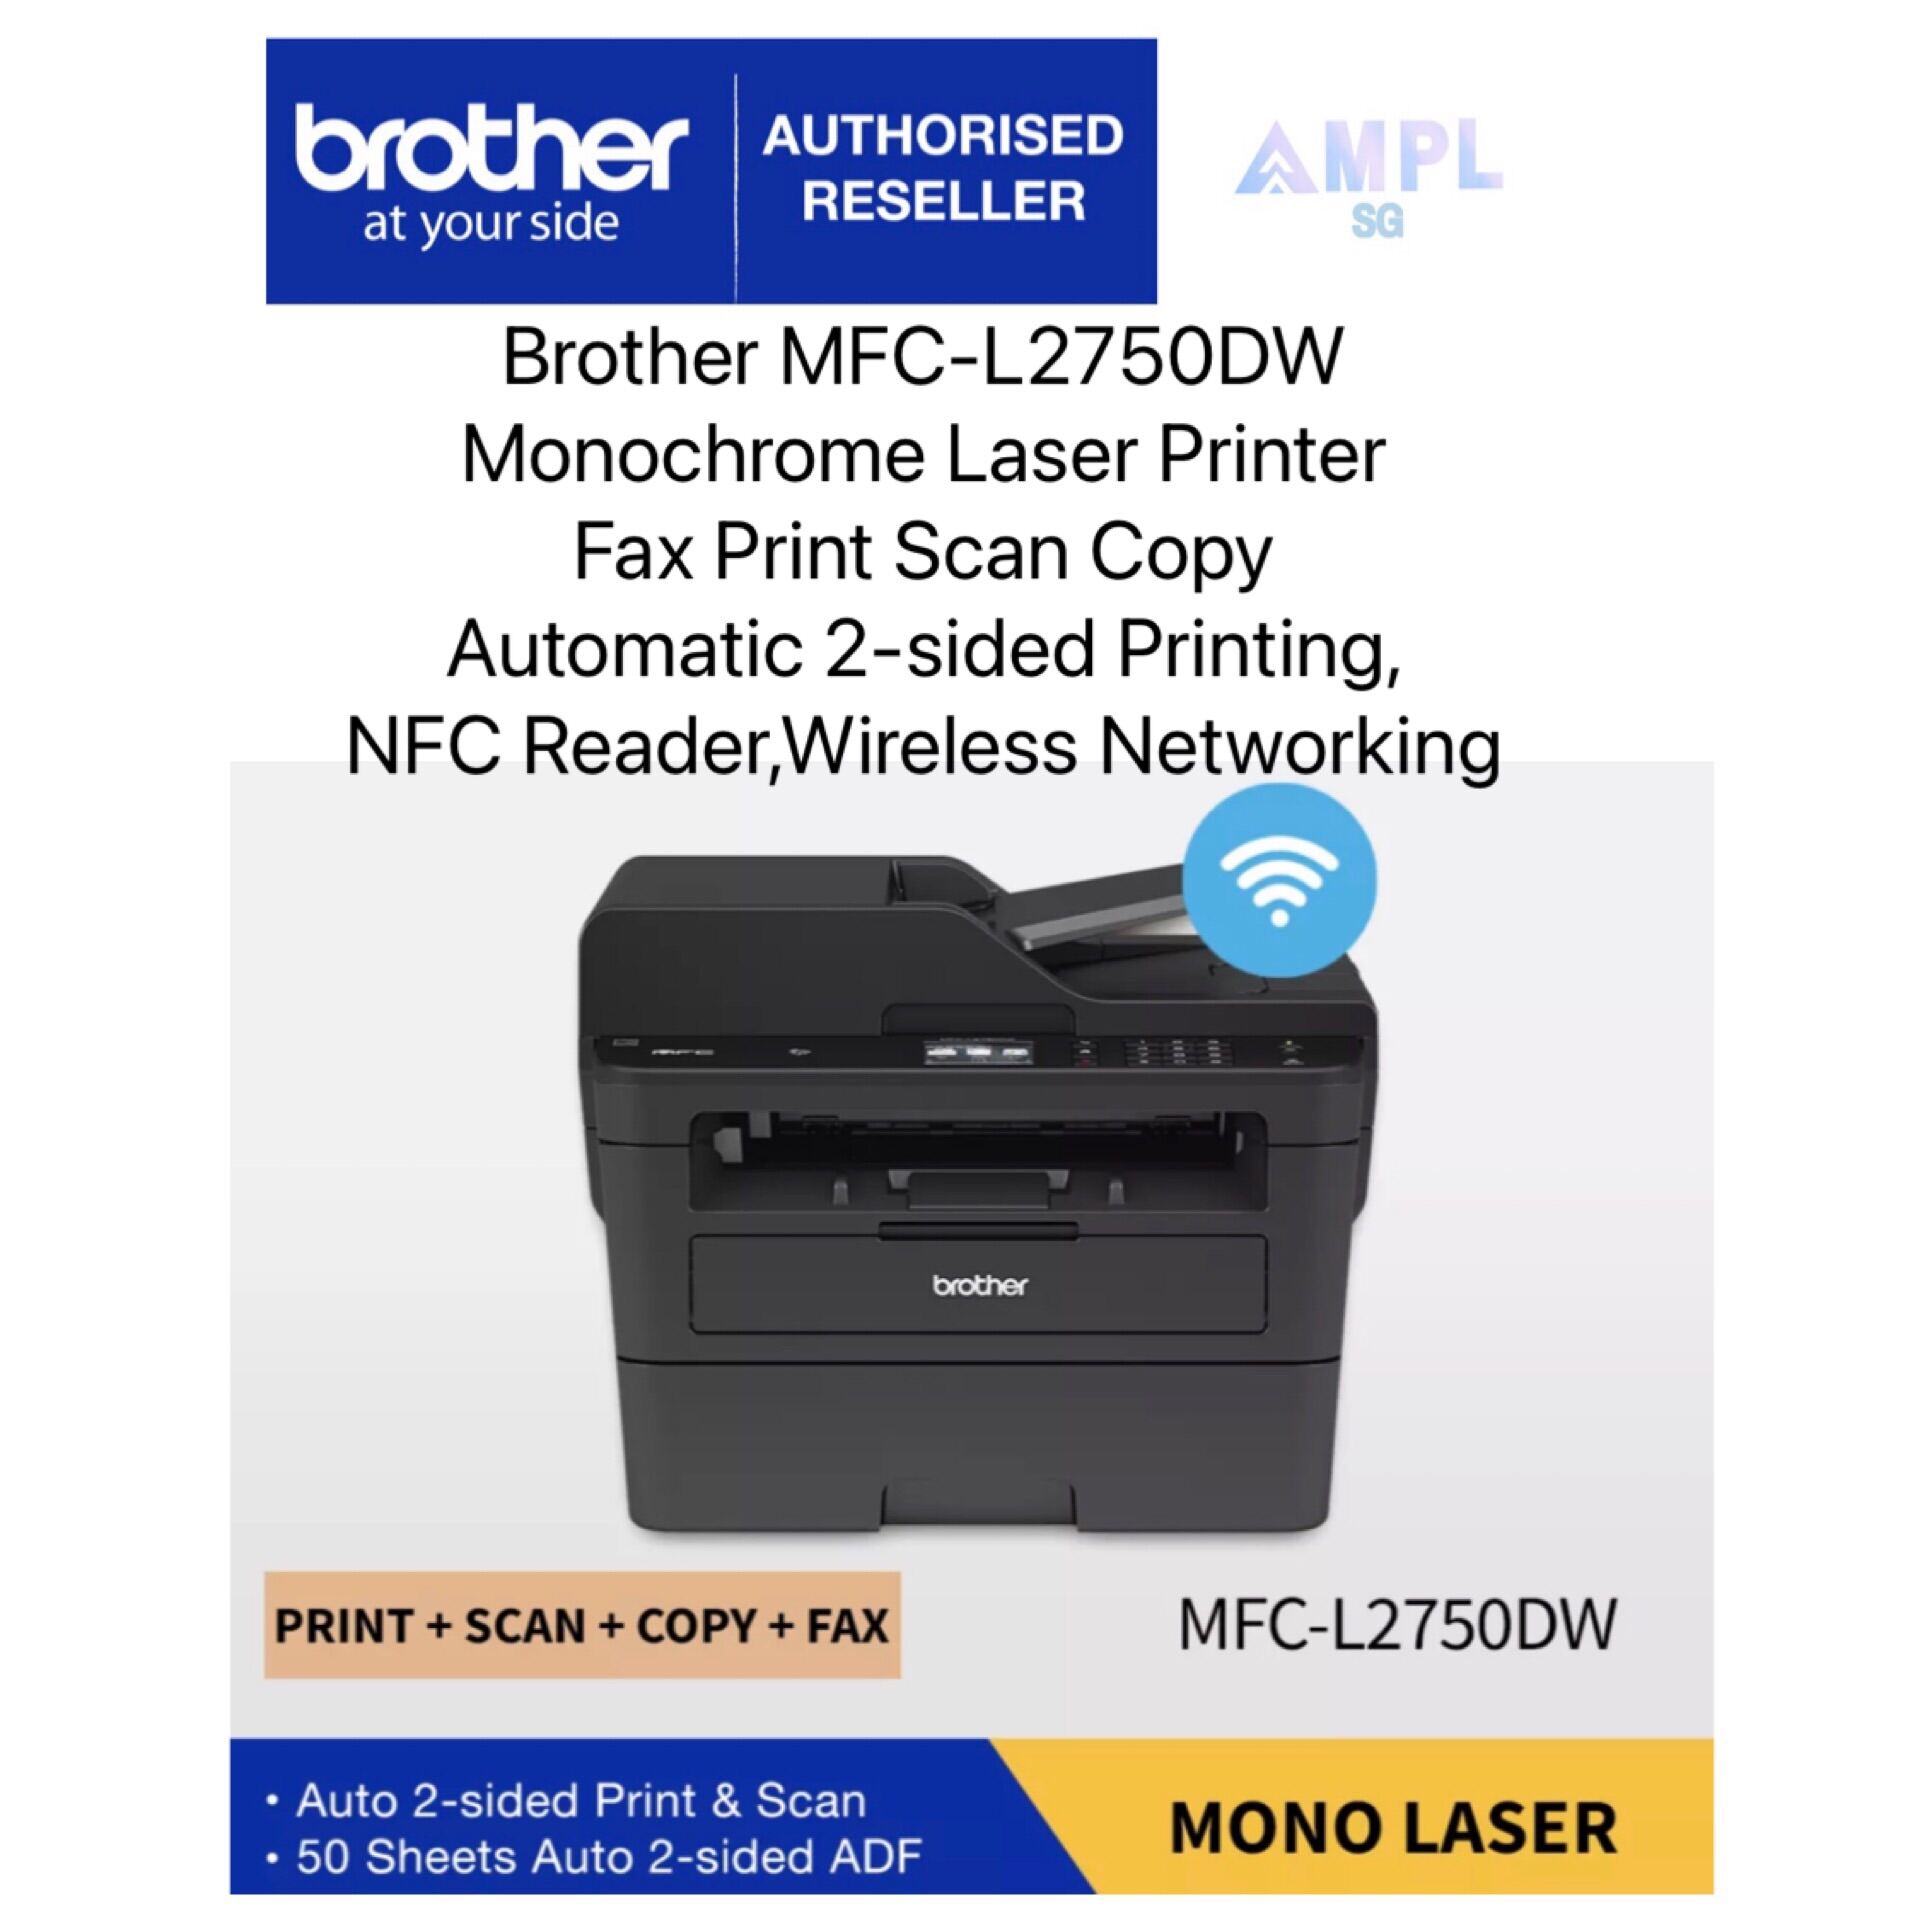 Brother MFC-L2750DW Monochrome Laser Printer Fax Print Scan Copy Wireless Automatic 2-sided Printing Orderable Supplies TN-2460,TN-2480,DR-2455 TN2460 2460 TN2480 2480 DR2455 2455 Singapore